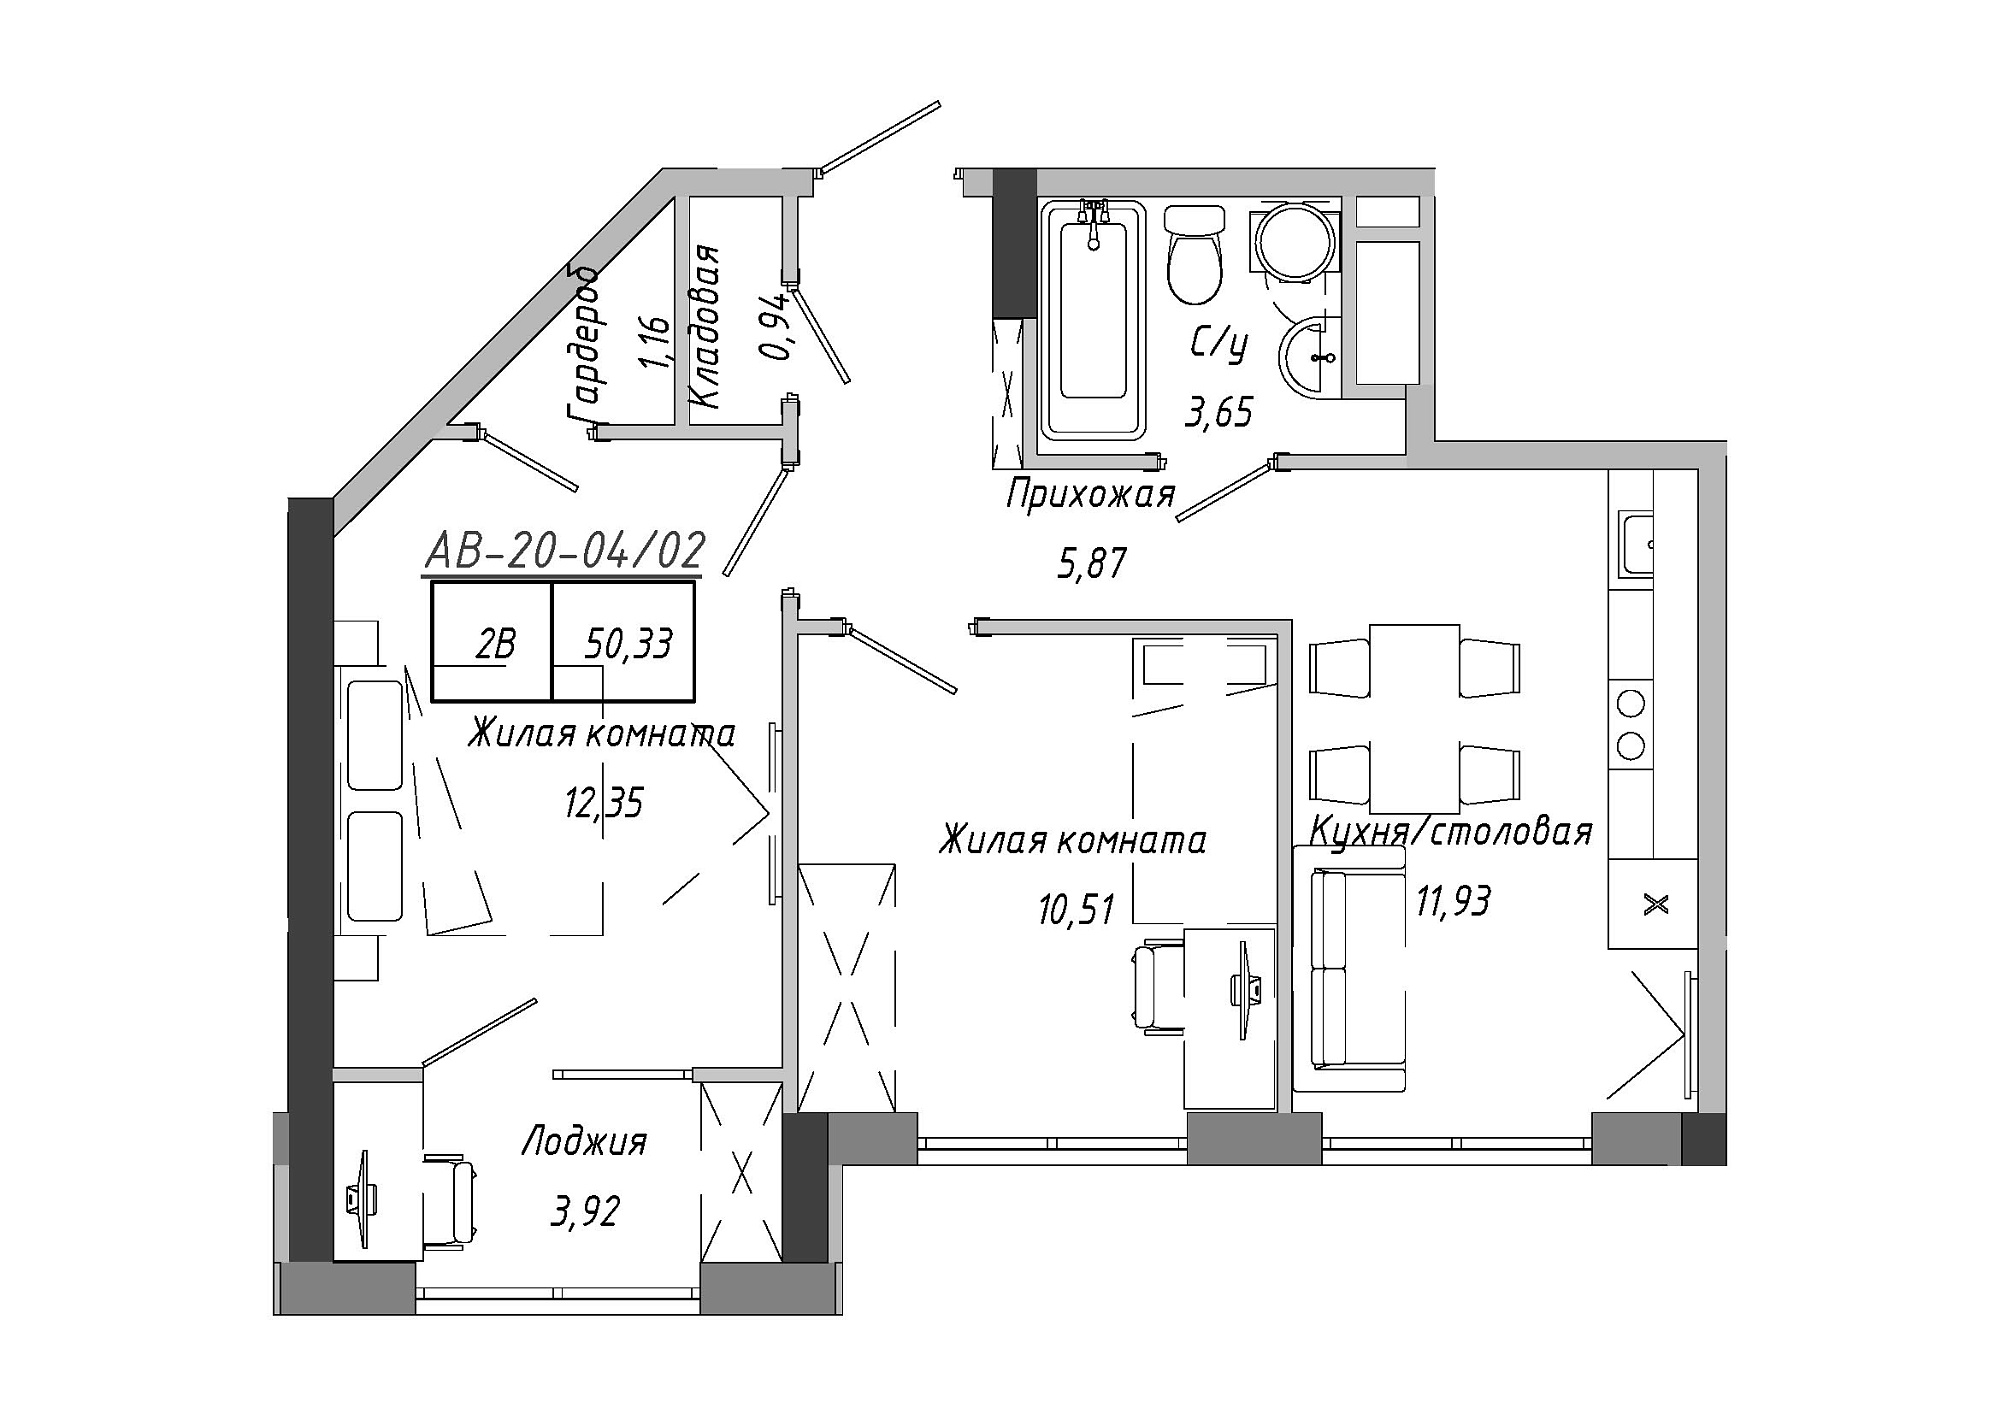 Planning 2-rm flats area 50.33m2, AB-20-04/00002.